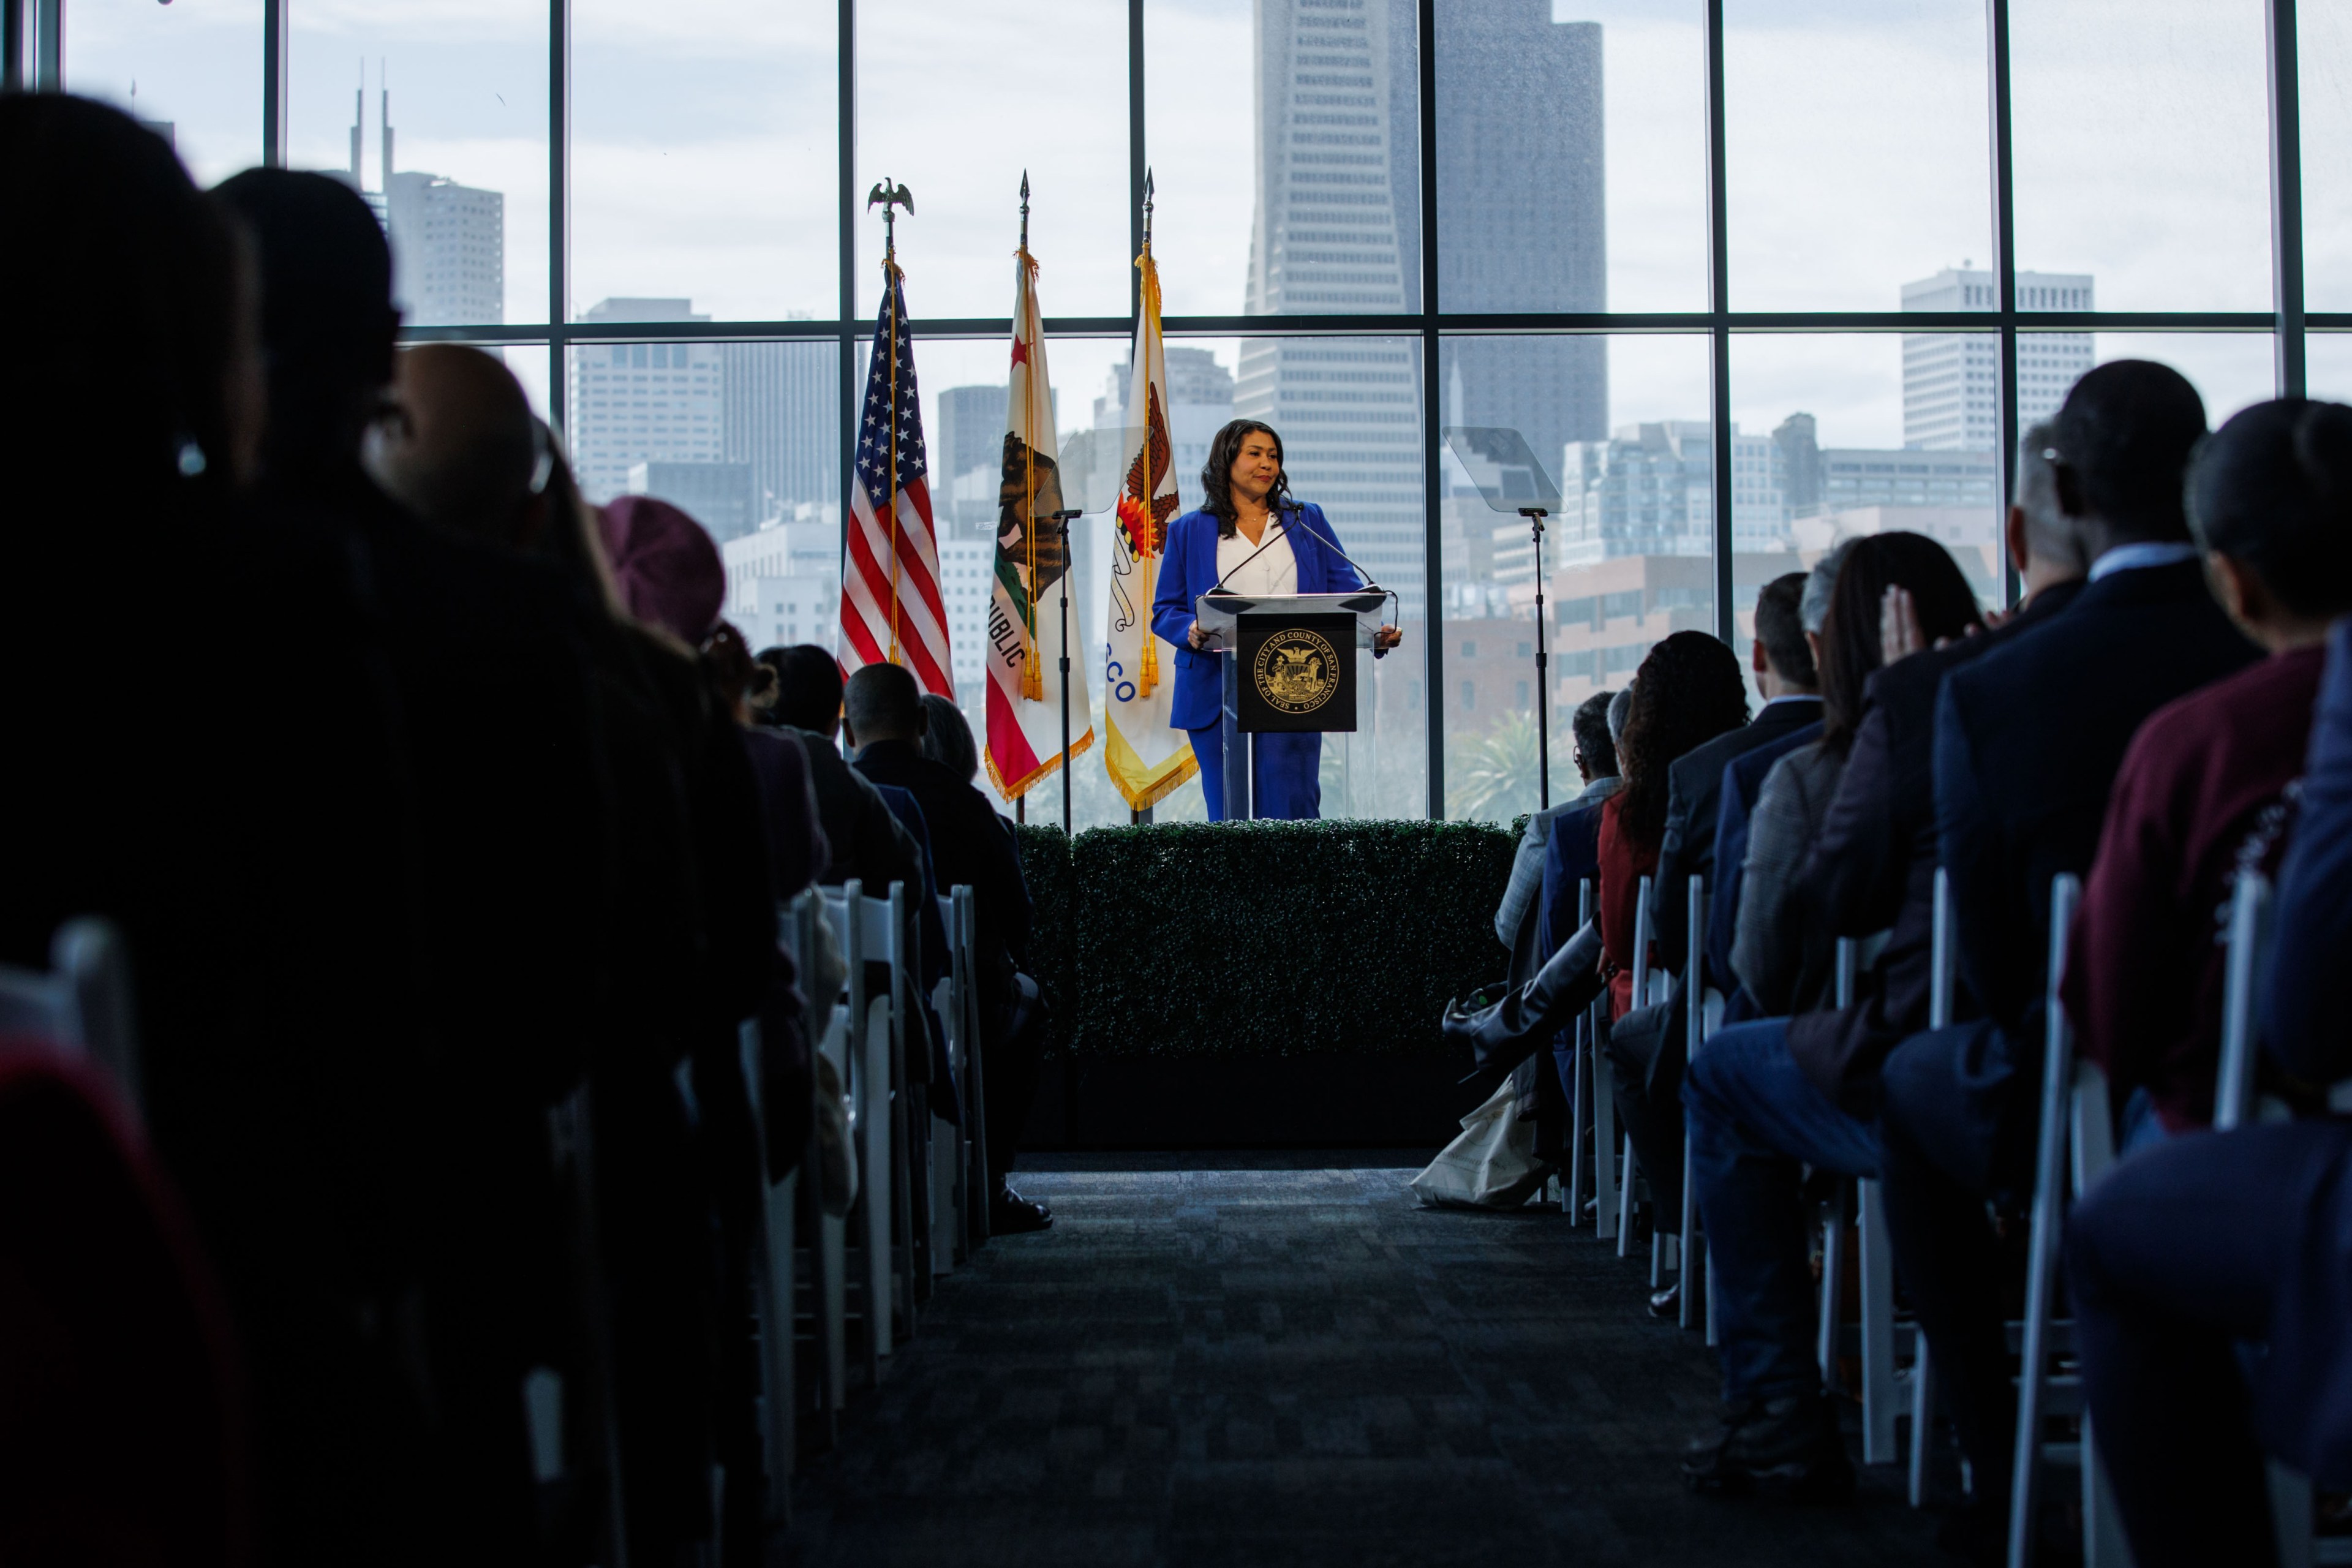 A person at a podium speaking to an audience with city skyline visible through floor-to-ceiling windows in the background.